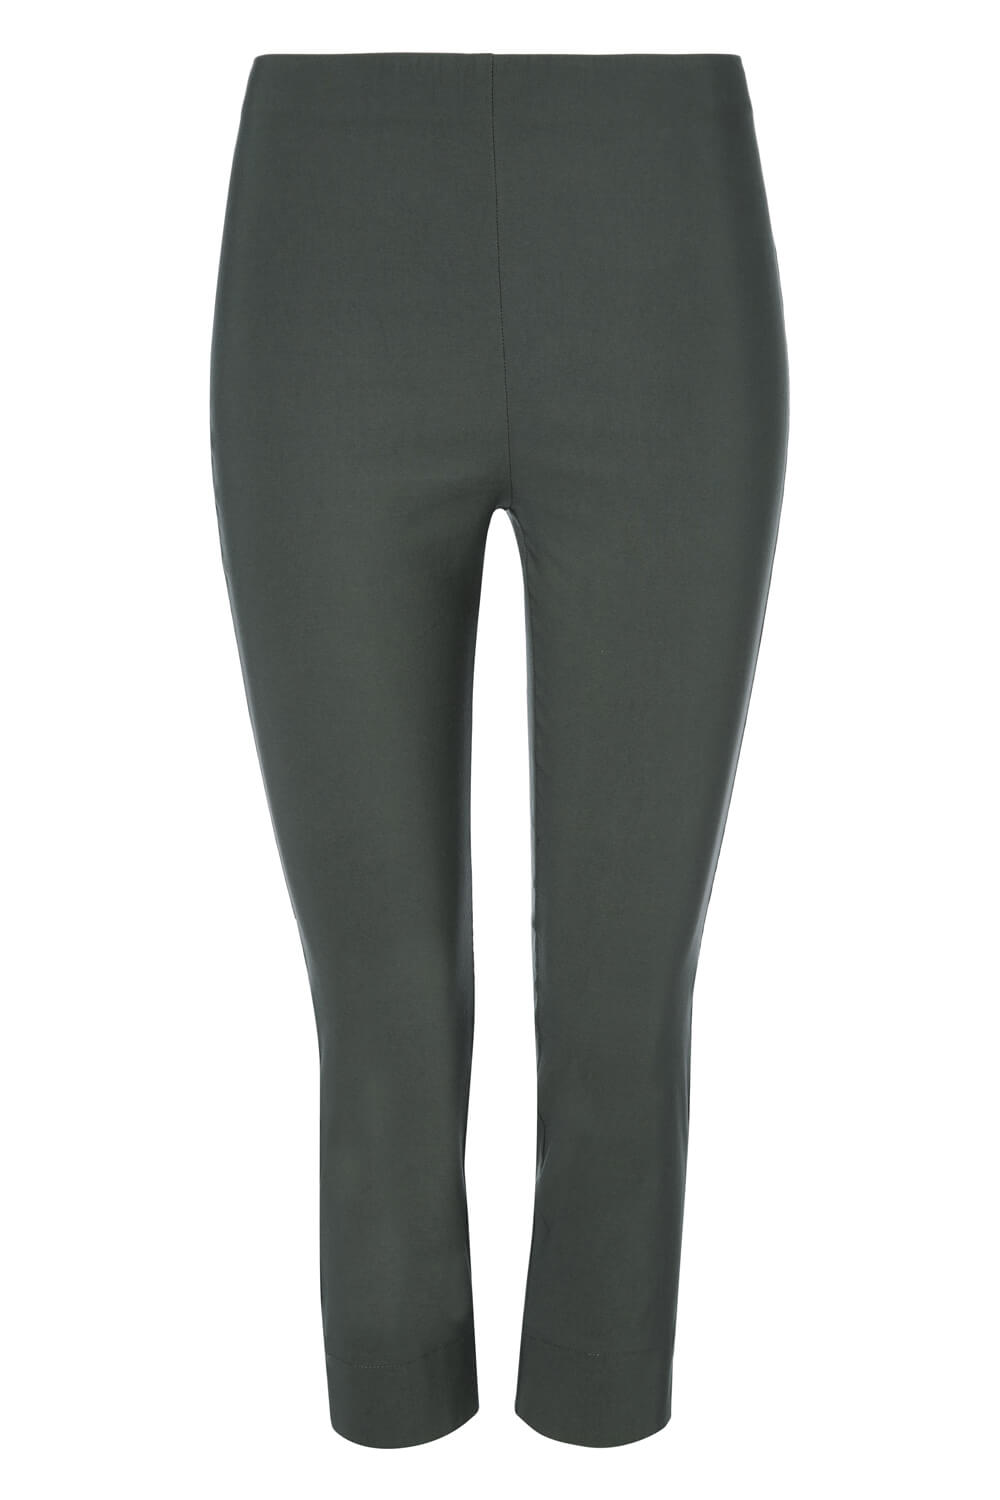 Bottle Green Cropped Stretch Trouser, Image 5 of 5